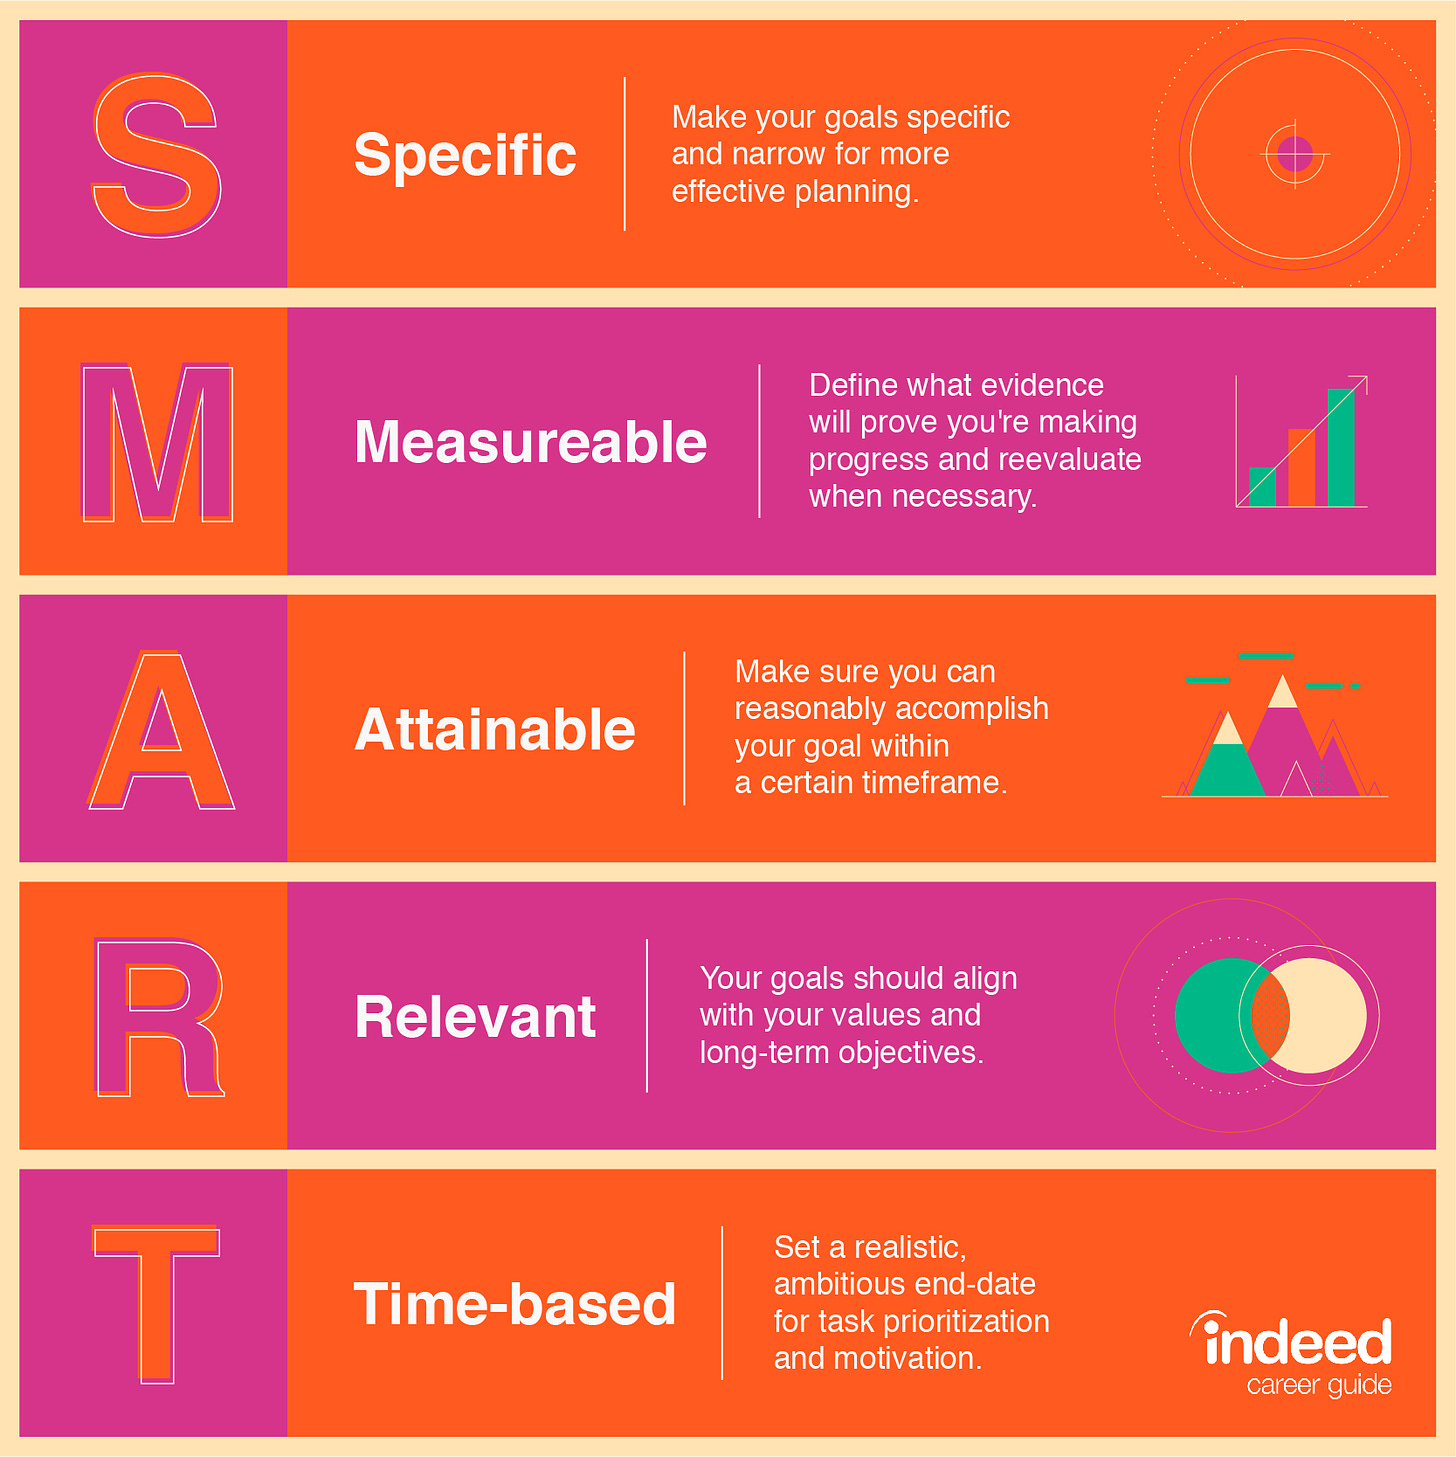 SMART Goals: Specific Measurable Attainable Relevant Time-based